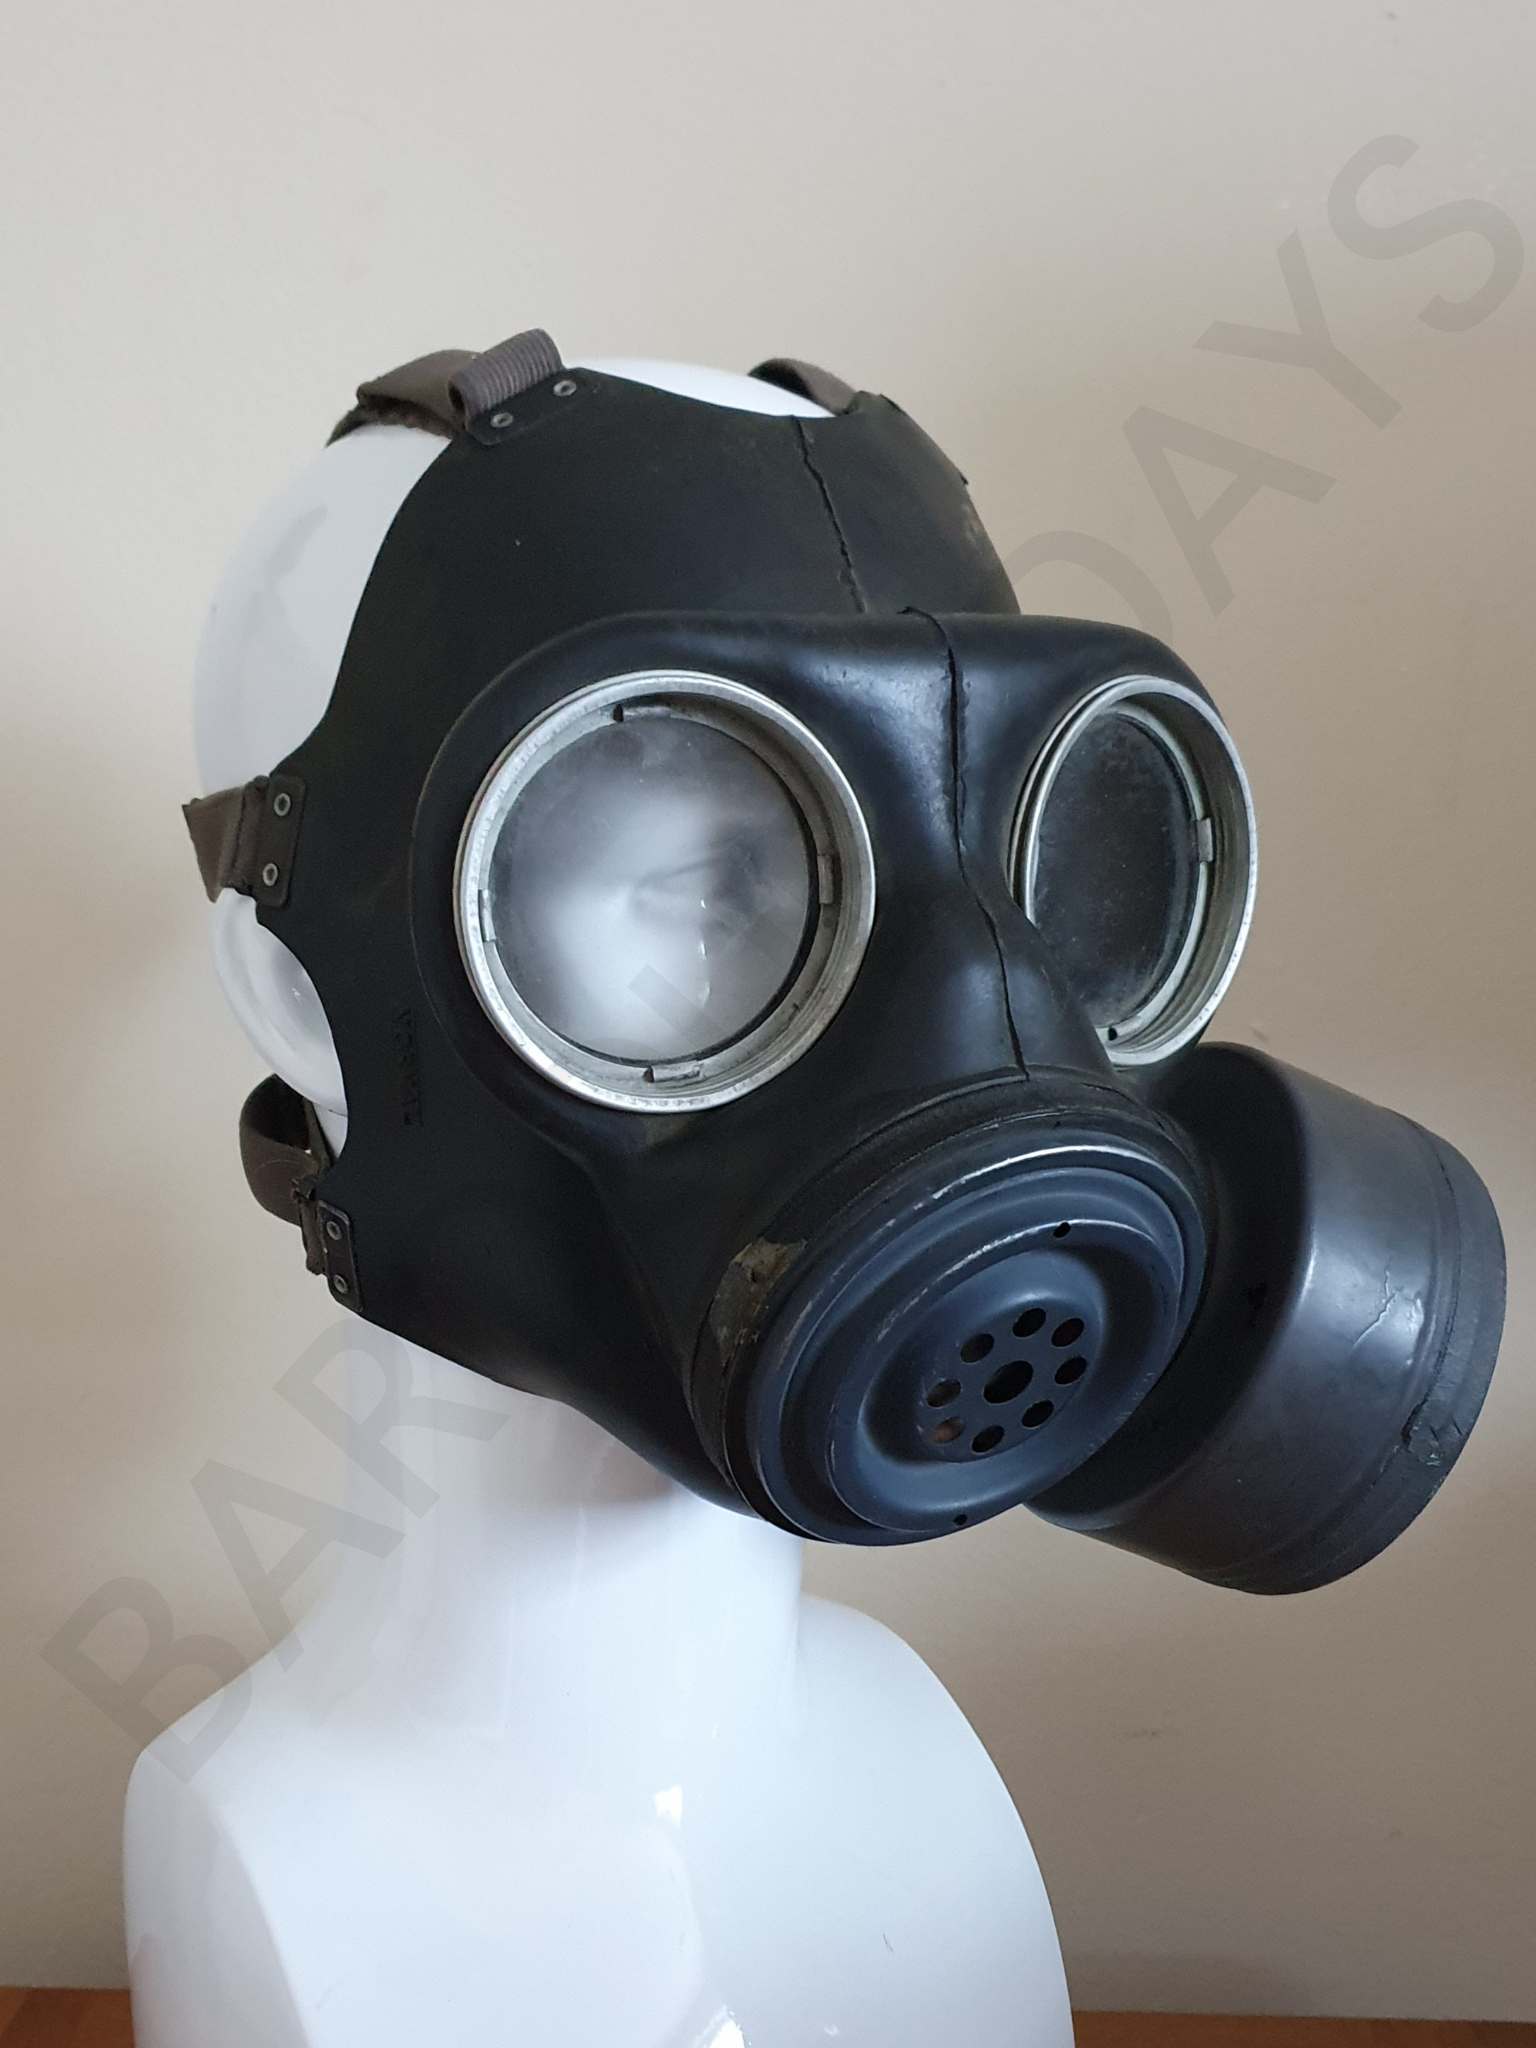 S10 FM12 Gas mask stick on front vent cover protector 